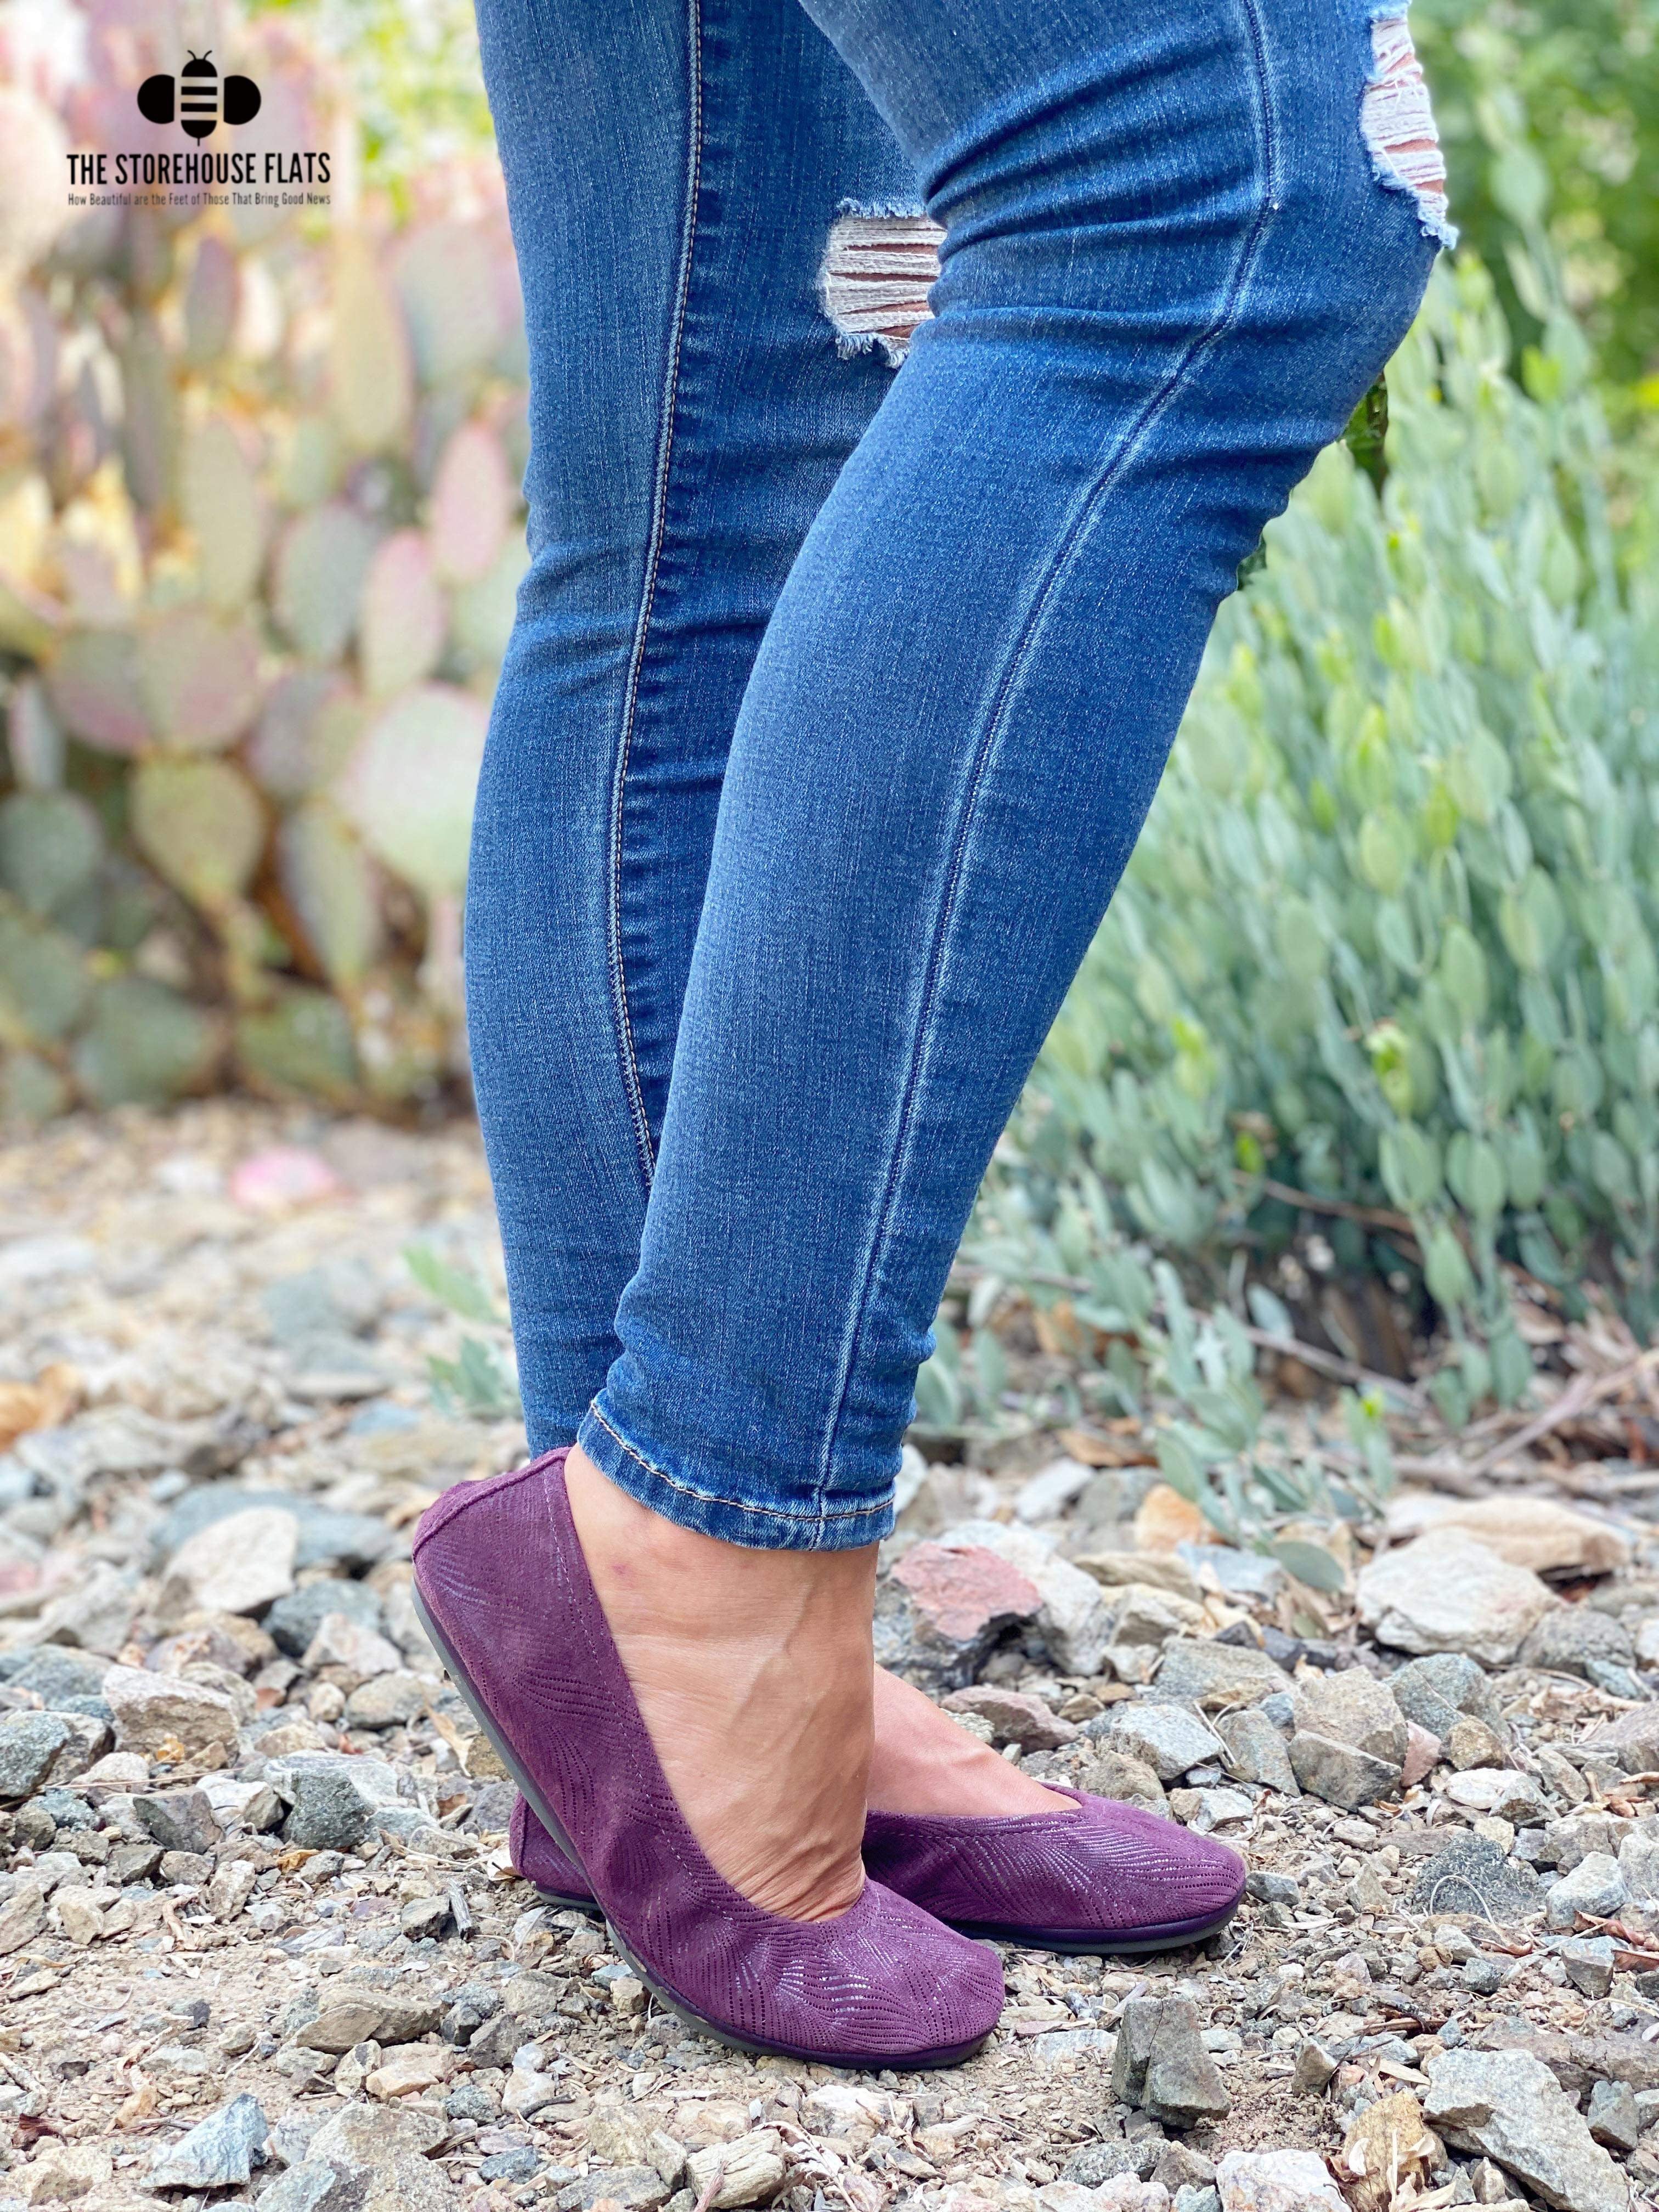 SALVIA DORRII SUEDE | JULY PREORDER - The Storehouse Flats